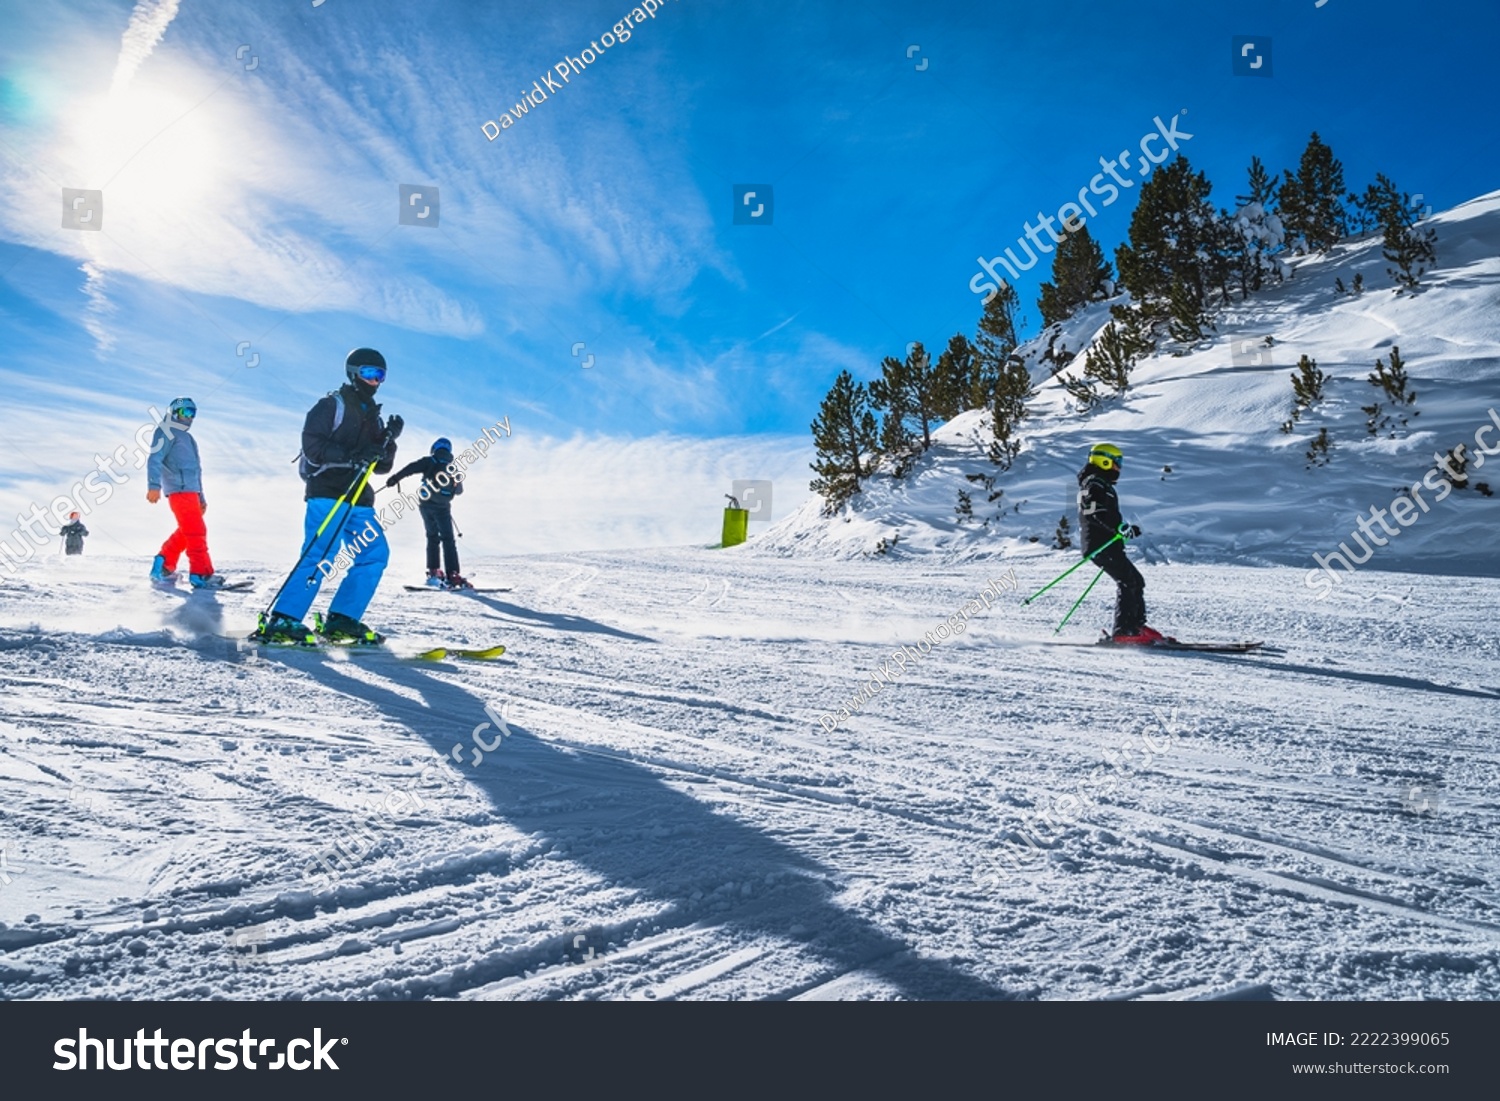 Group of people skiing and snowboarding down the ski slope or piste in Pyrenees Mountains. Winter ski holidays in El Tarter, Grandvalira, Andorra #2222399065